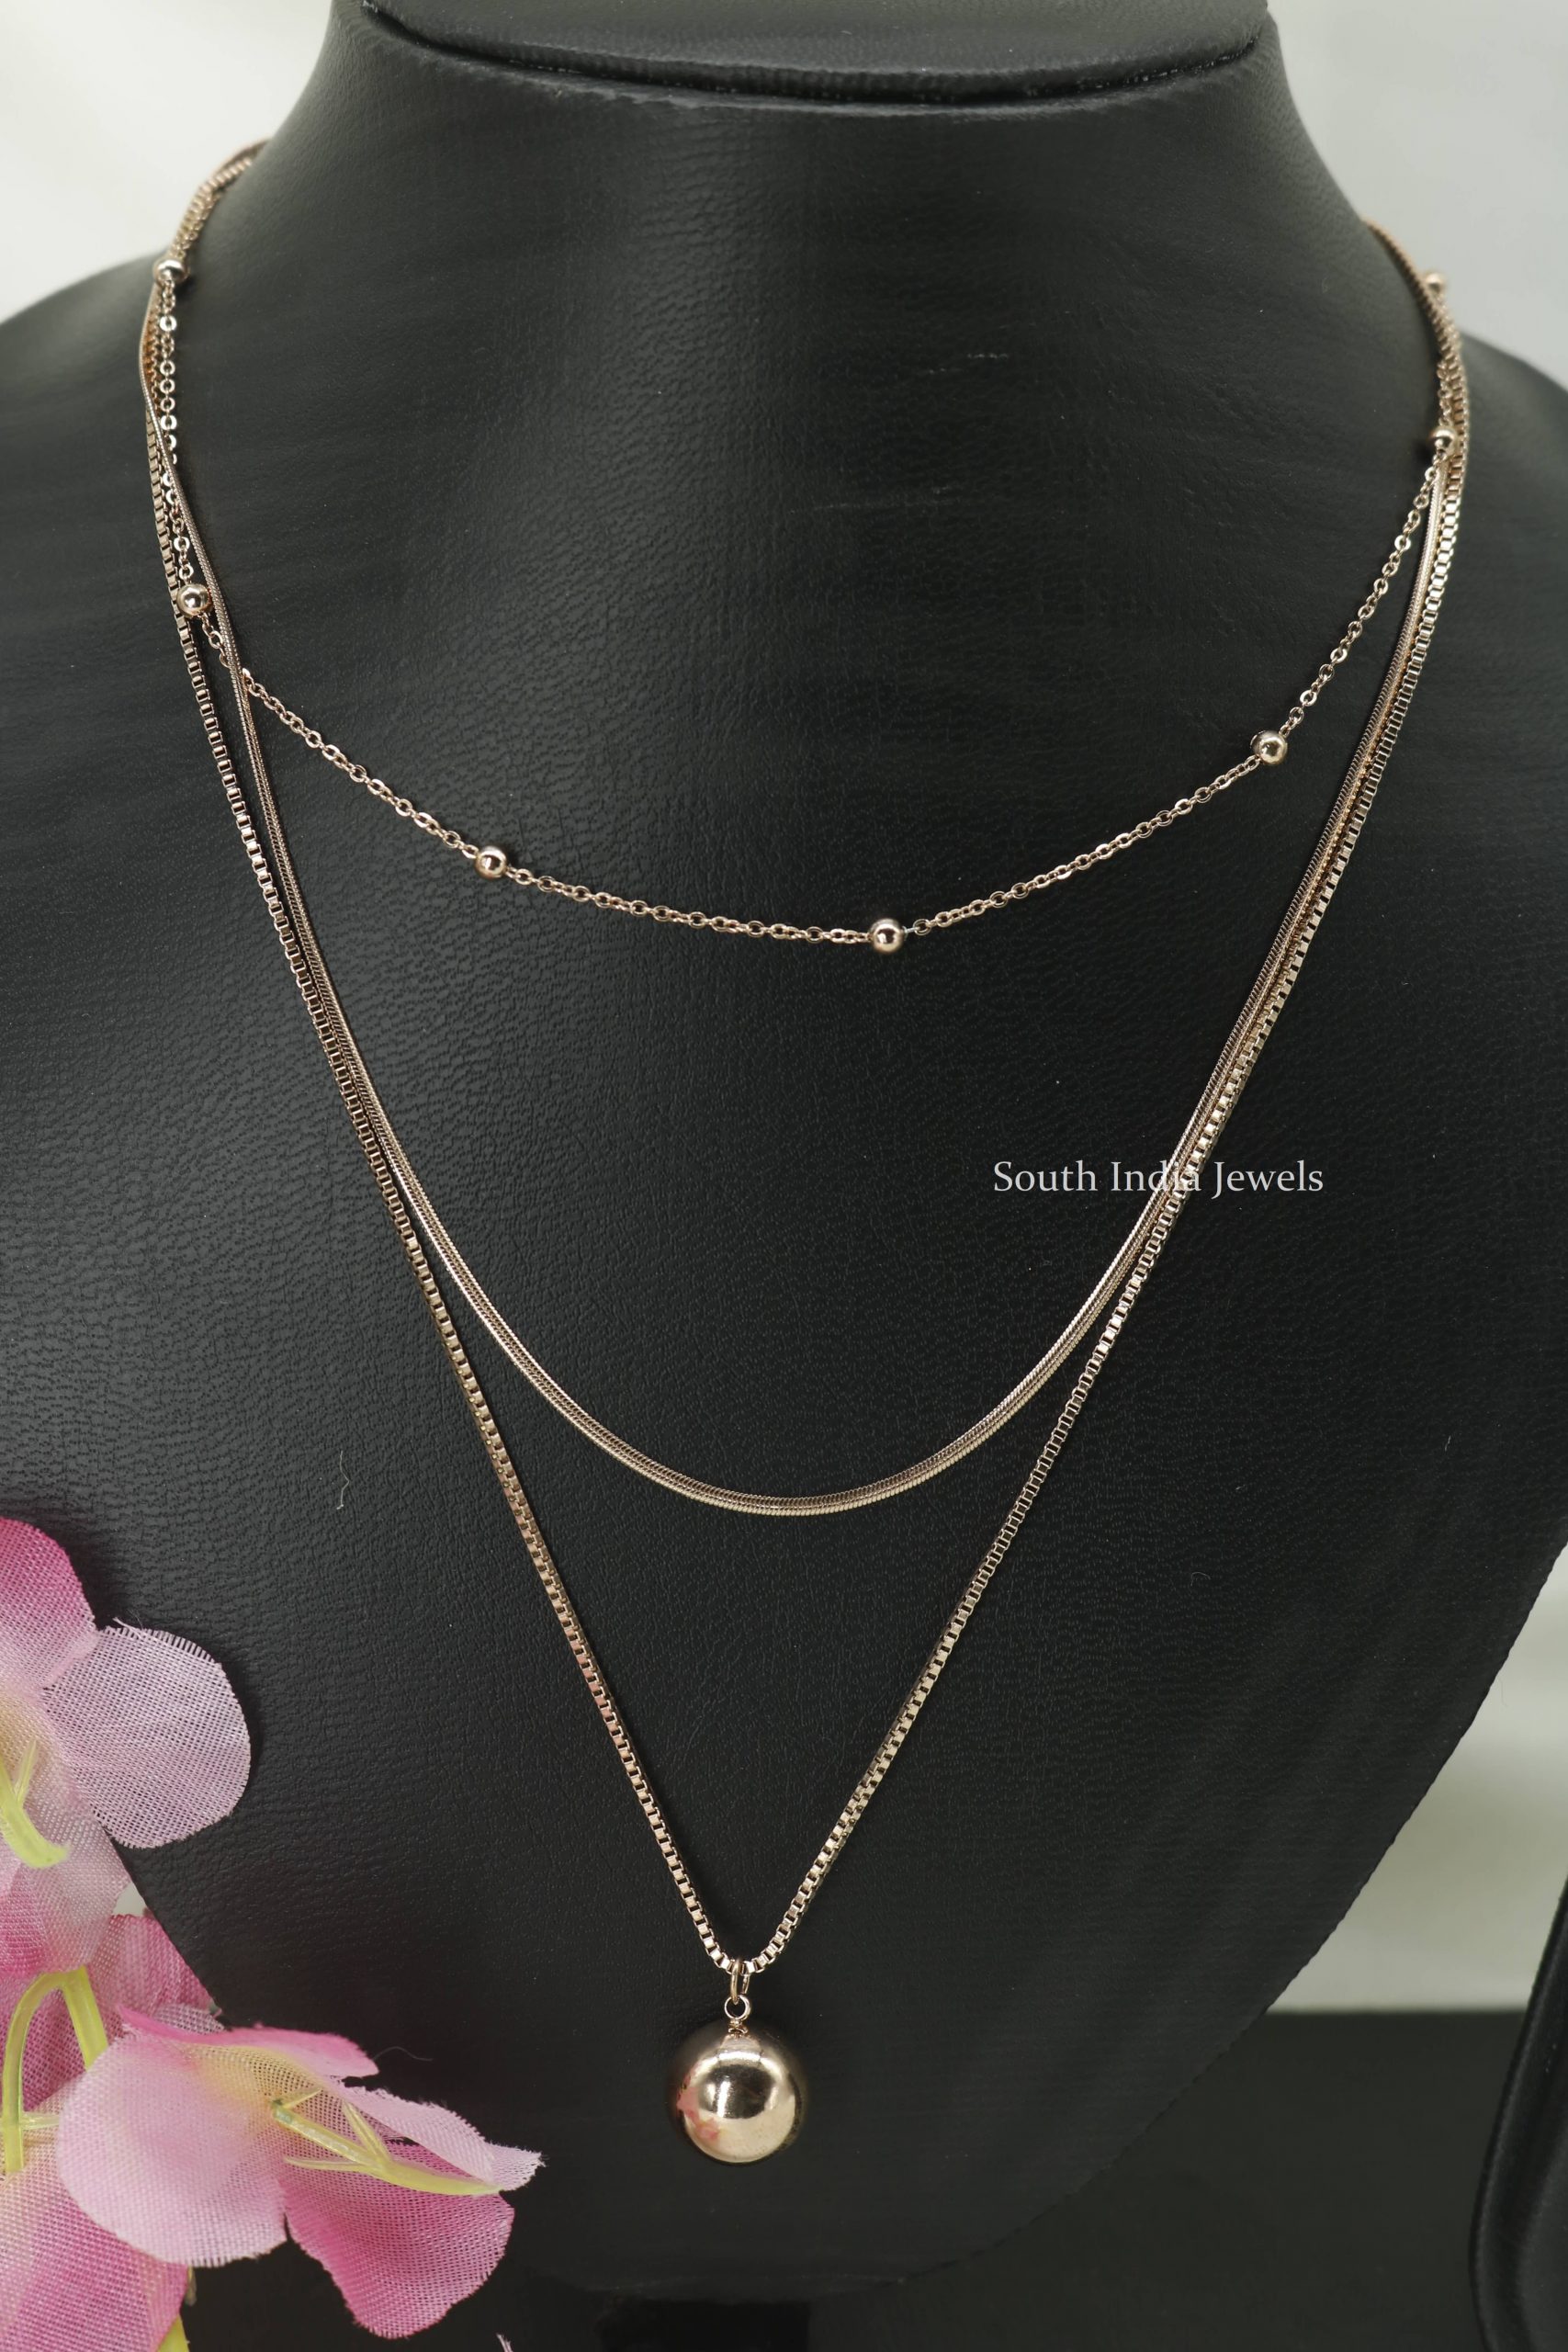 Three Layered Pendent Chain- South India Jewels Online Stores.